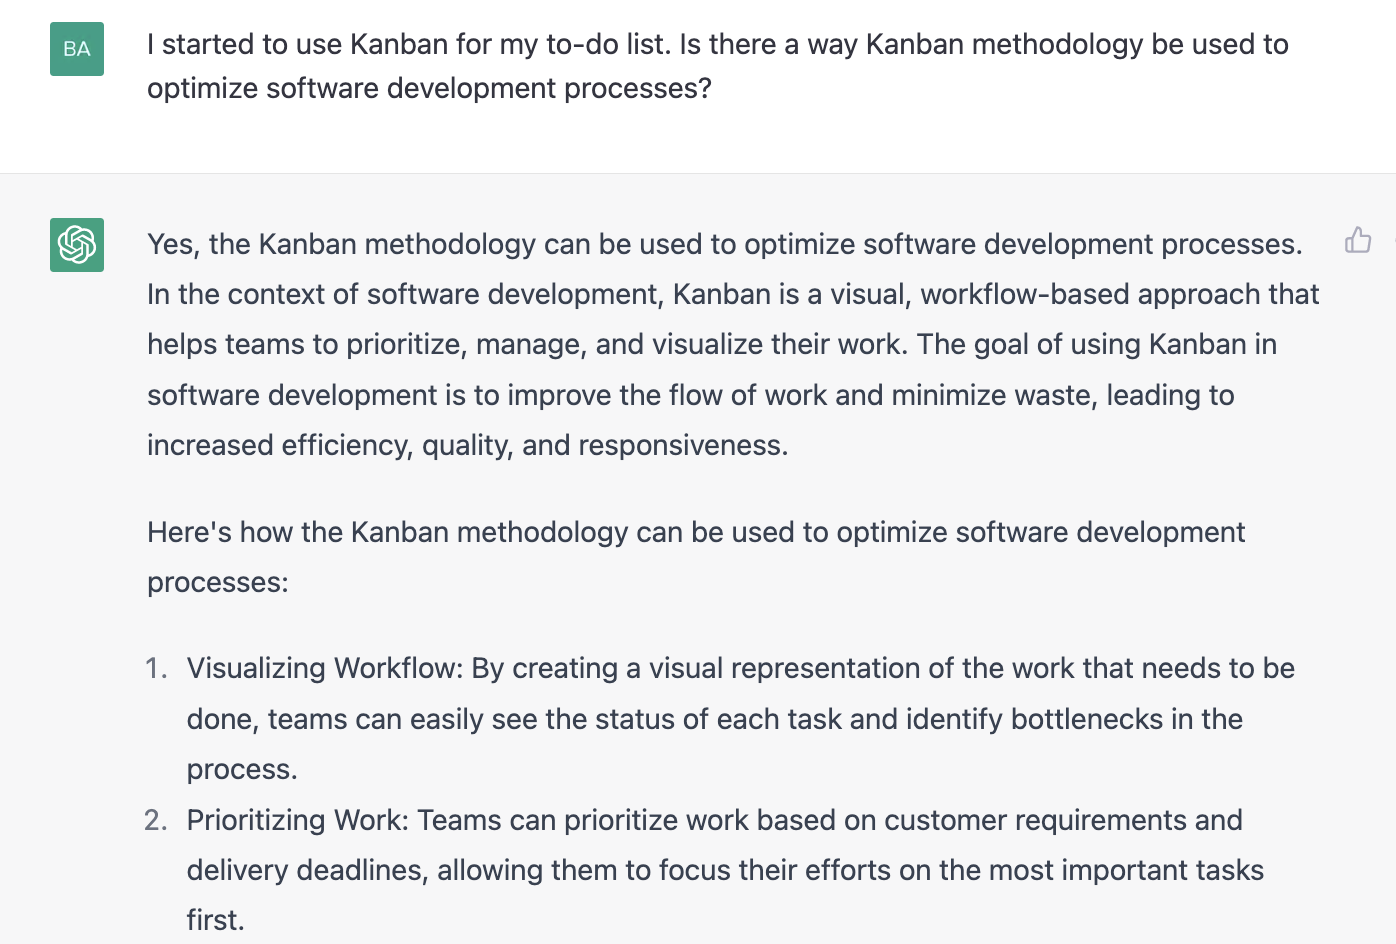 ChatGPT prompt about how the kanban methodology can be used to optimize software development